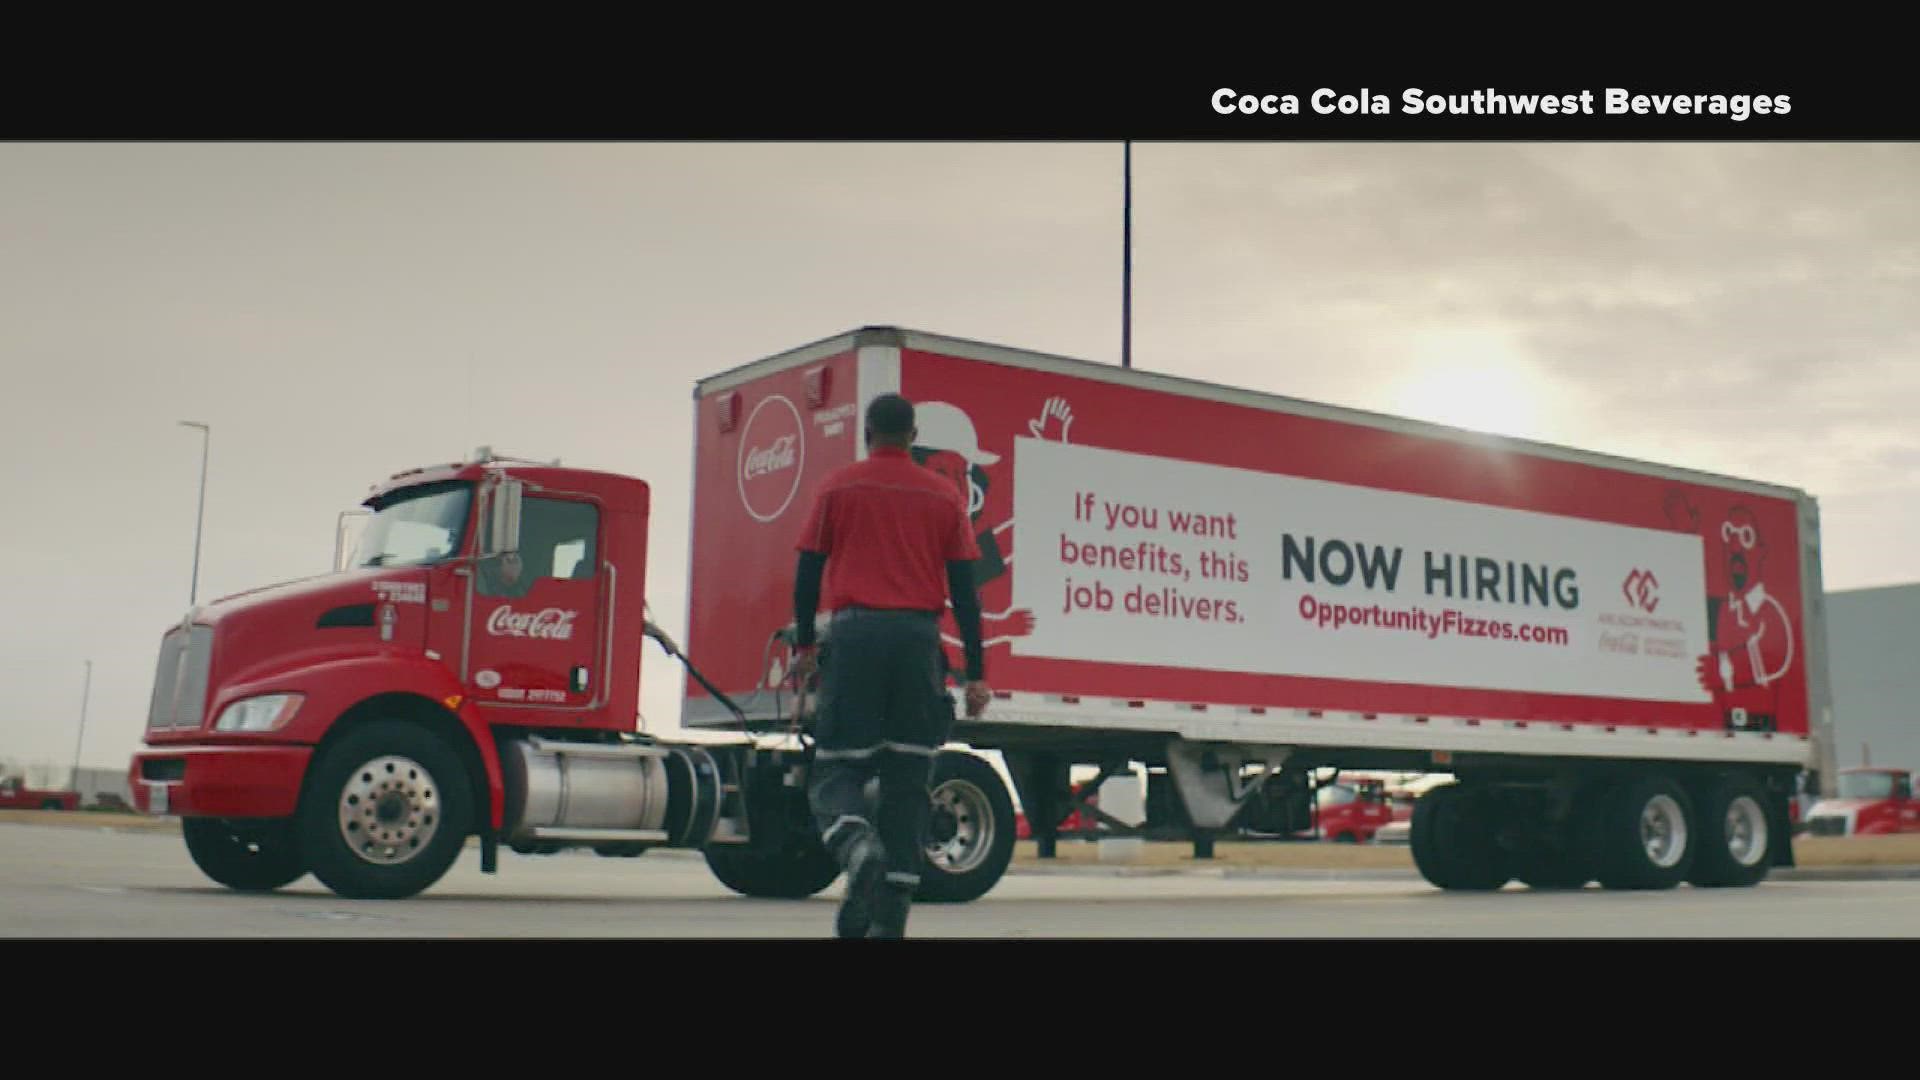 Super Bowl ad to show jobs at Dallas CocaCola bottling company